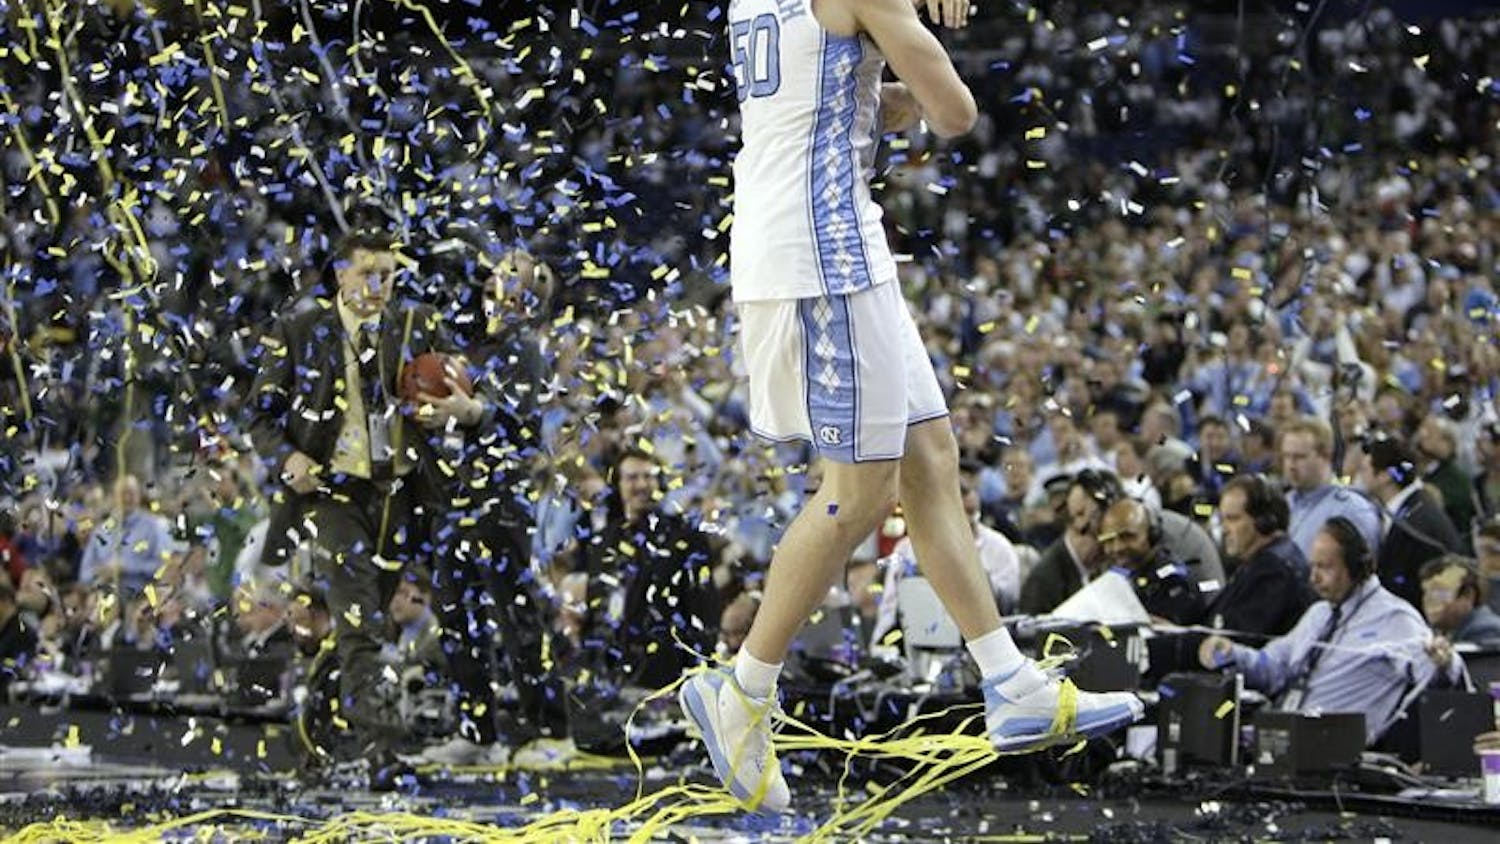 North Carolina's Tyler Hansbrough celebrates after his team's 89-72 victory over Michigan State in the championship game at the men's NCAA Final Four college basketball tournament on Monday in Detroit.